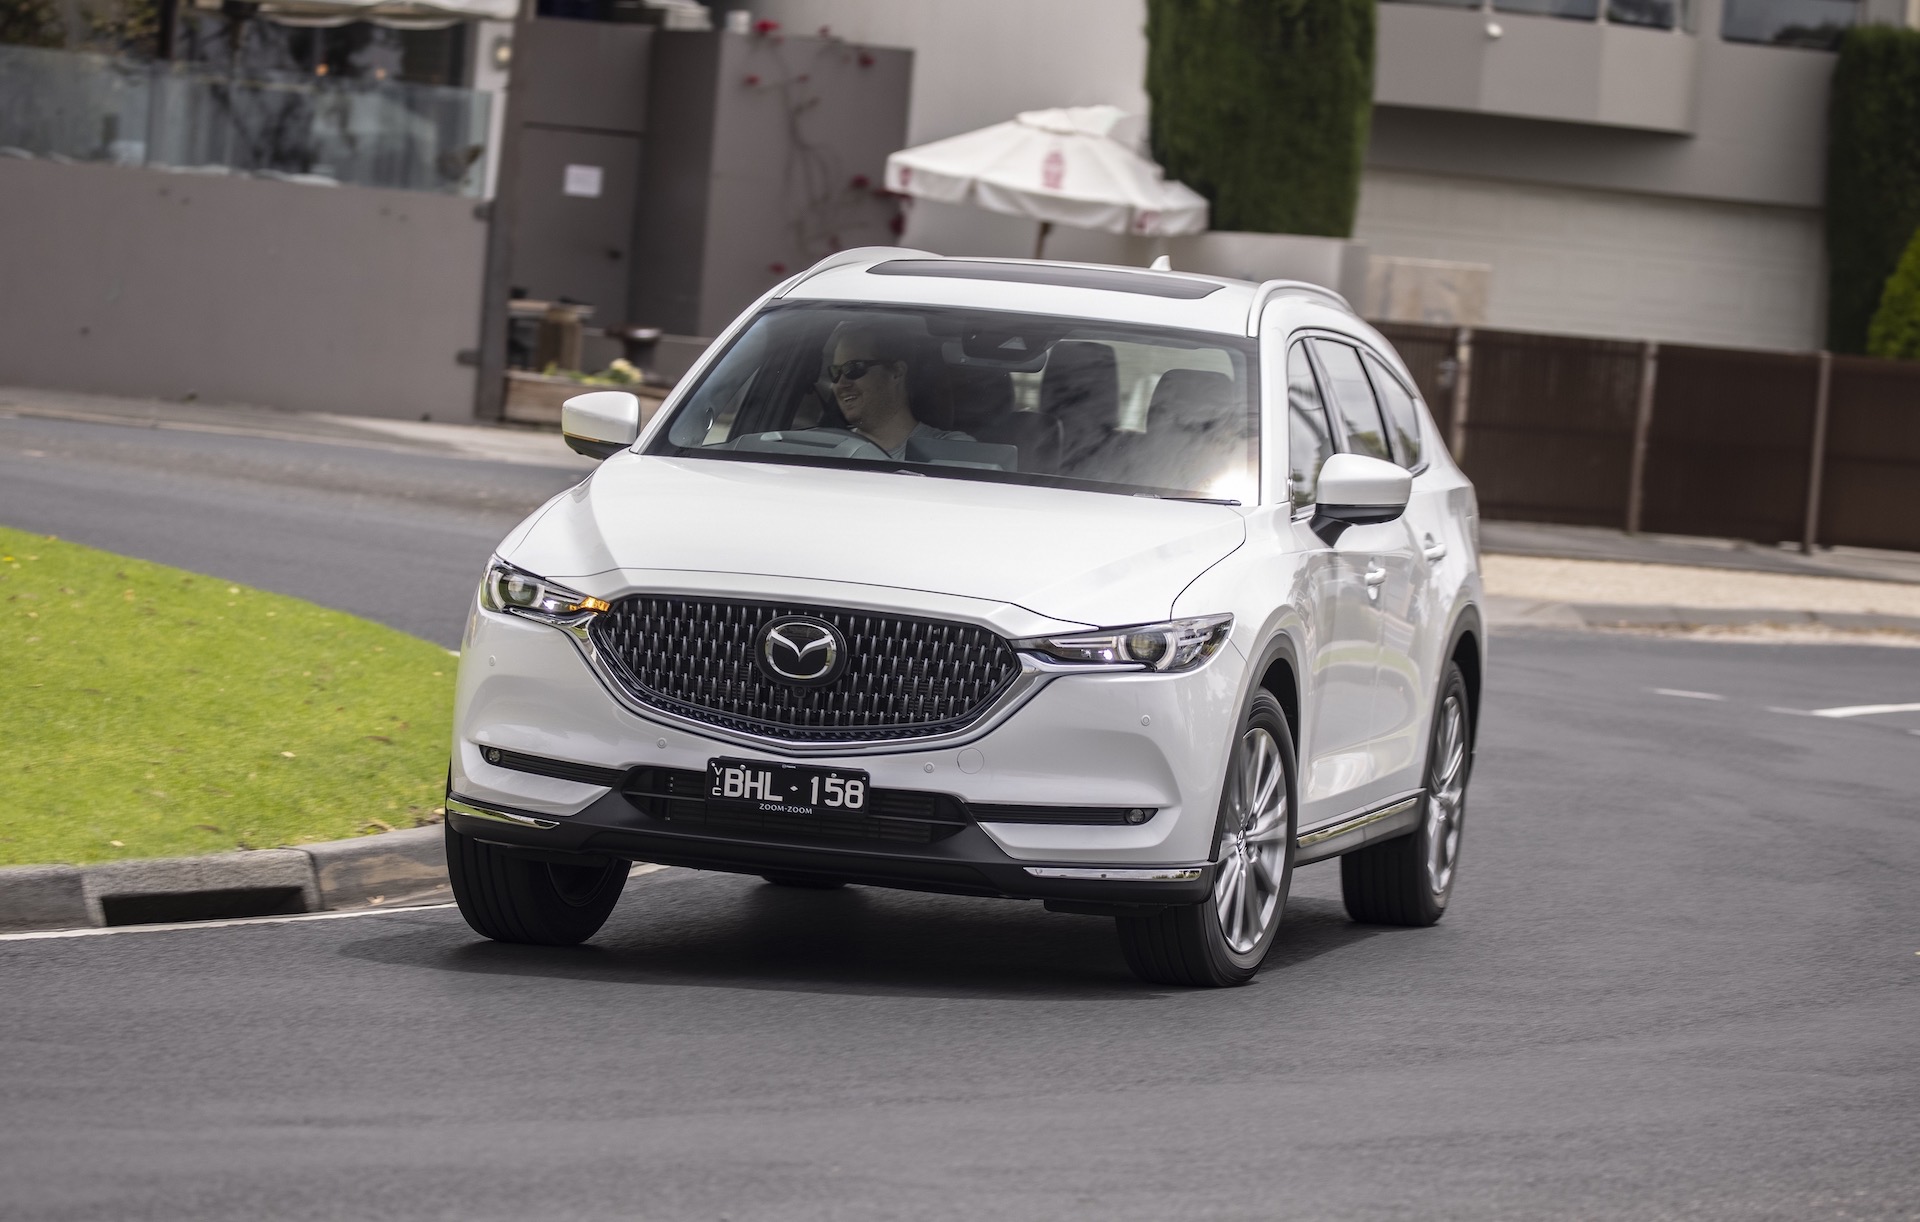 2022 Mazda CX-8 update now on sale in Australia, from $39,990